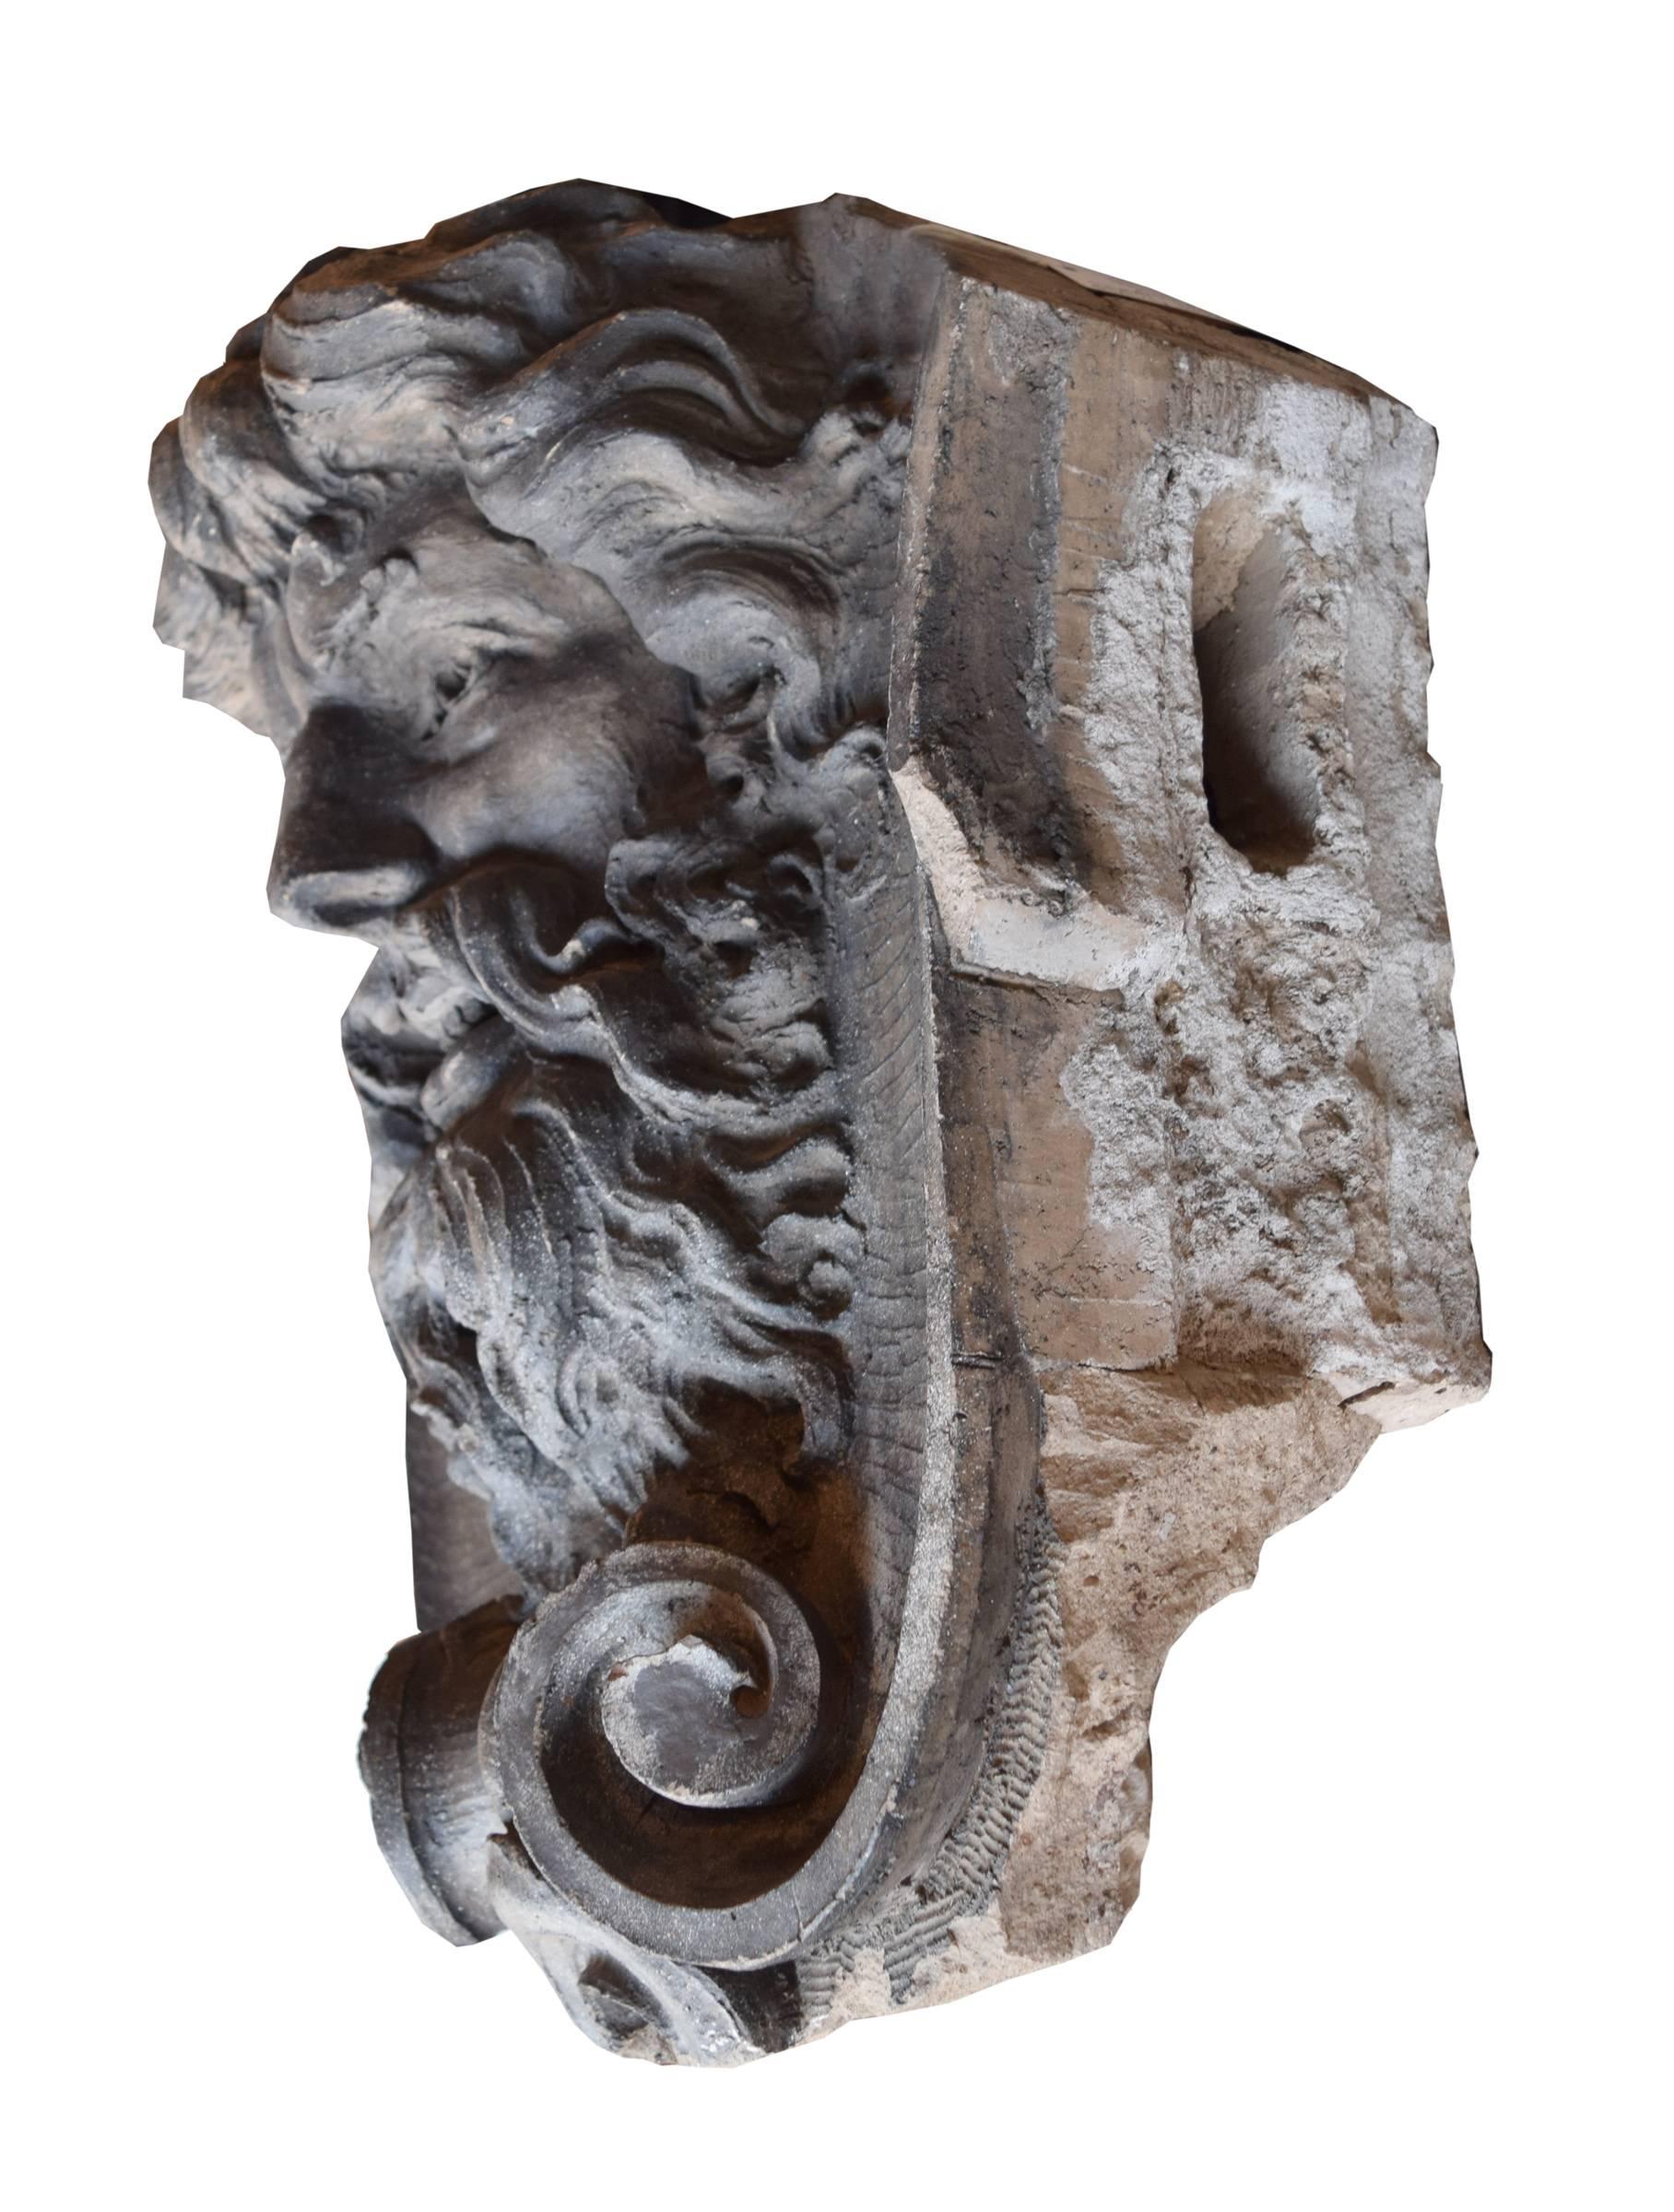 American terra cotta building ornament depicting a wise grinning man with flowing hair resting atop a scroll form, circa 1900.